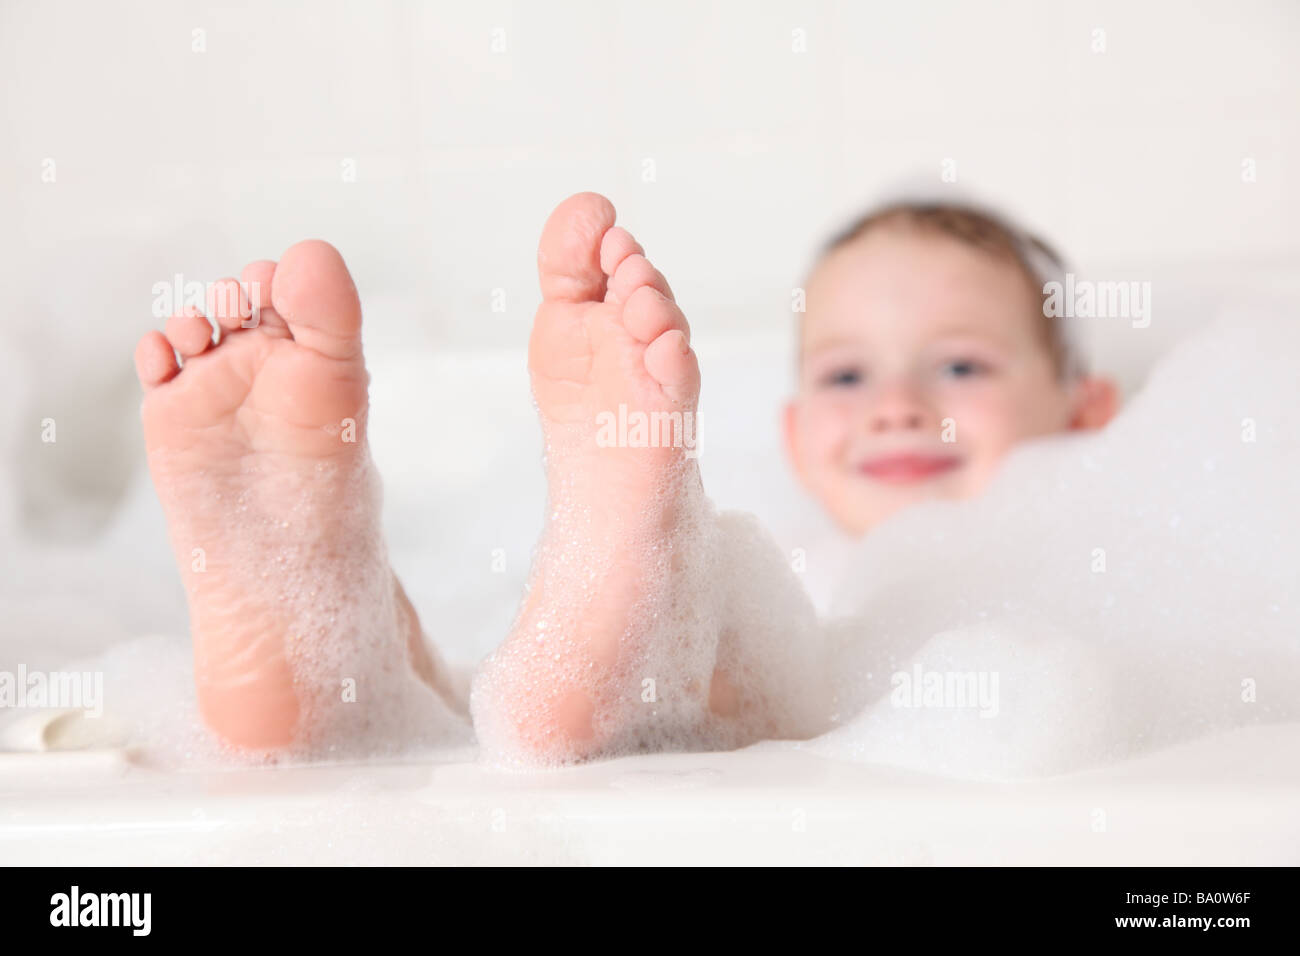 Young boy with feet sticking out of bubble bath Stock Photo